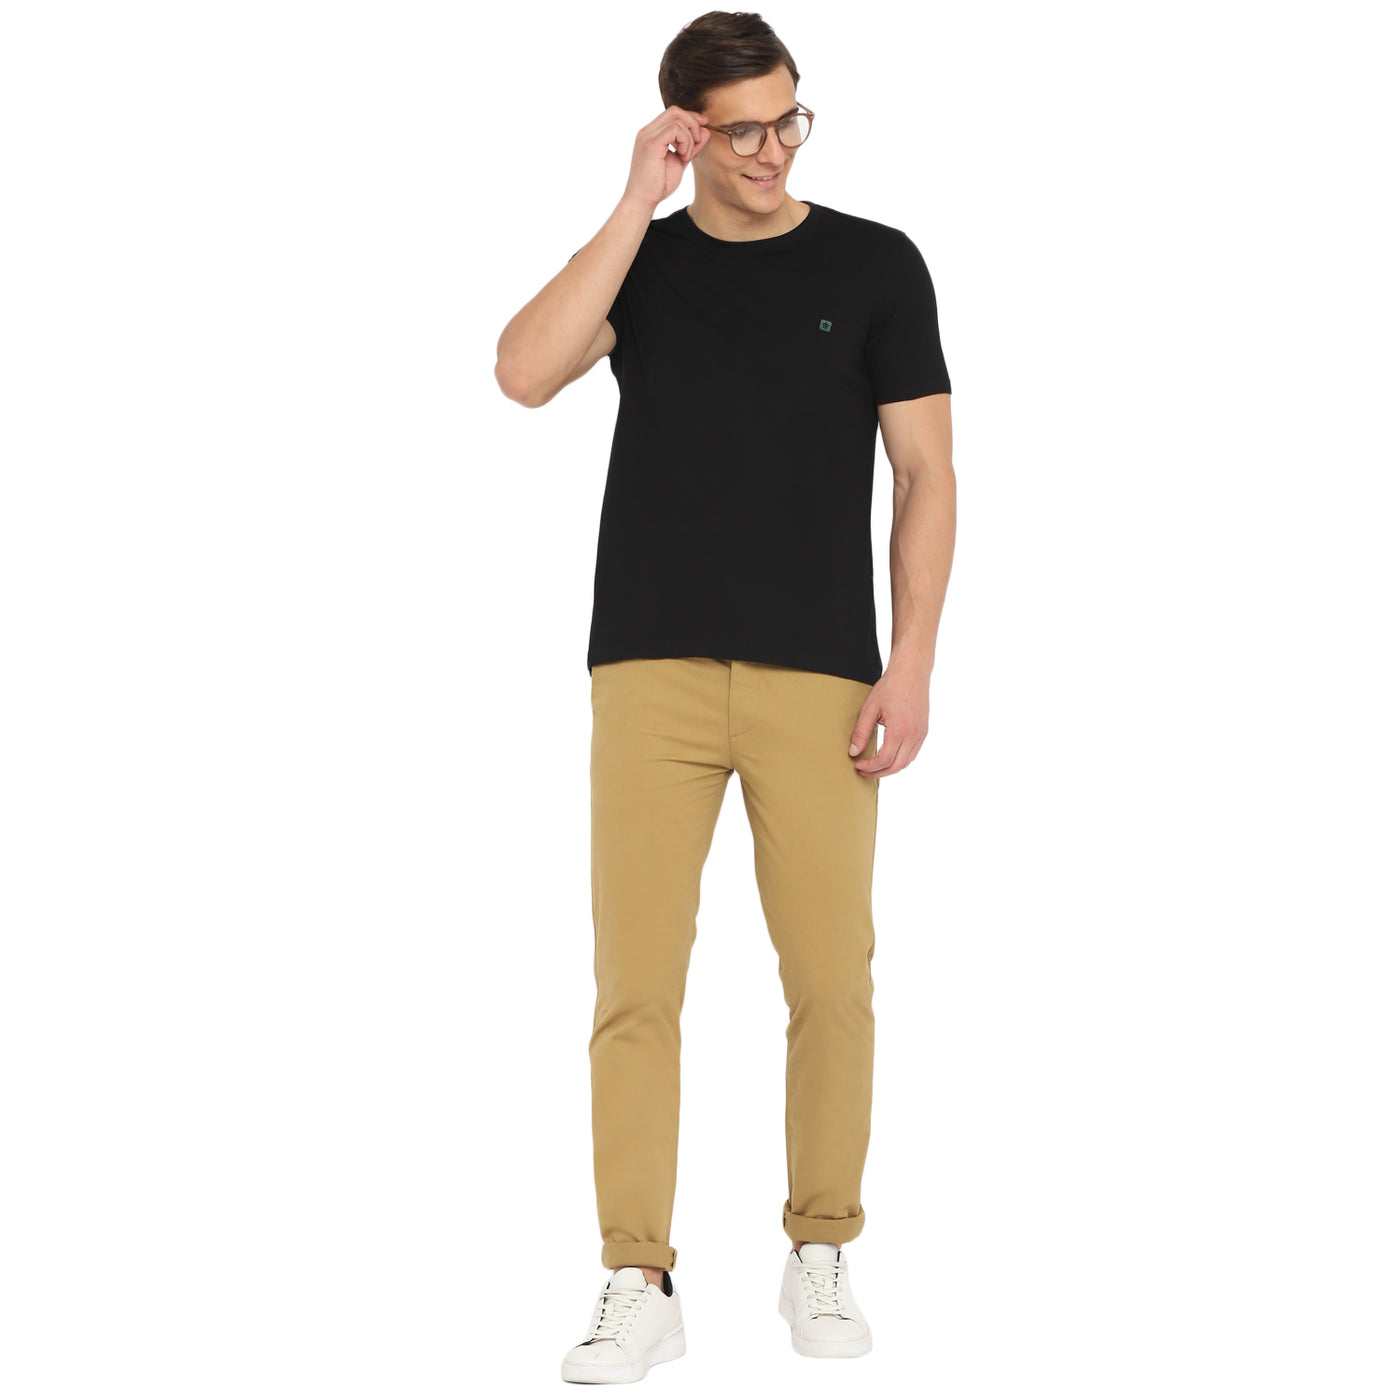 Essentials Assorted Solid Round Neck T-Shirt (Pack of 3)